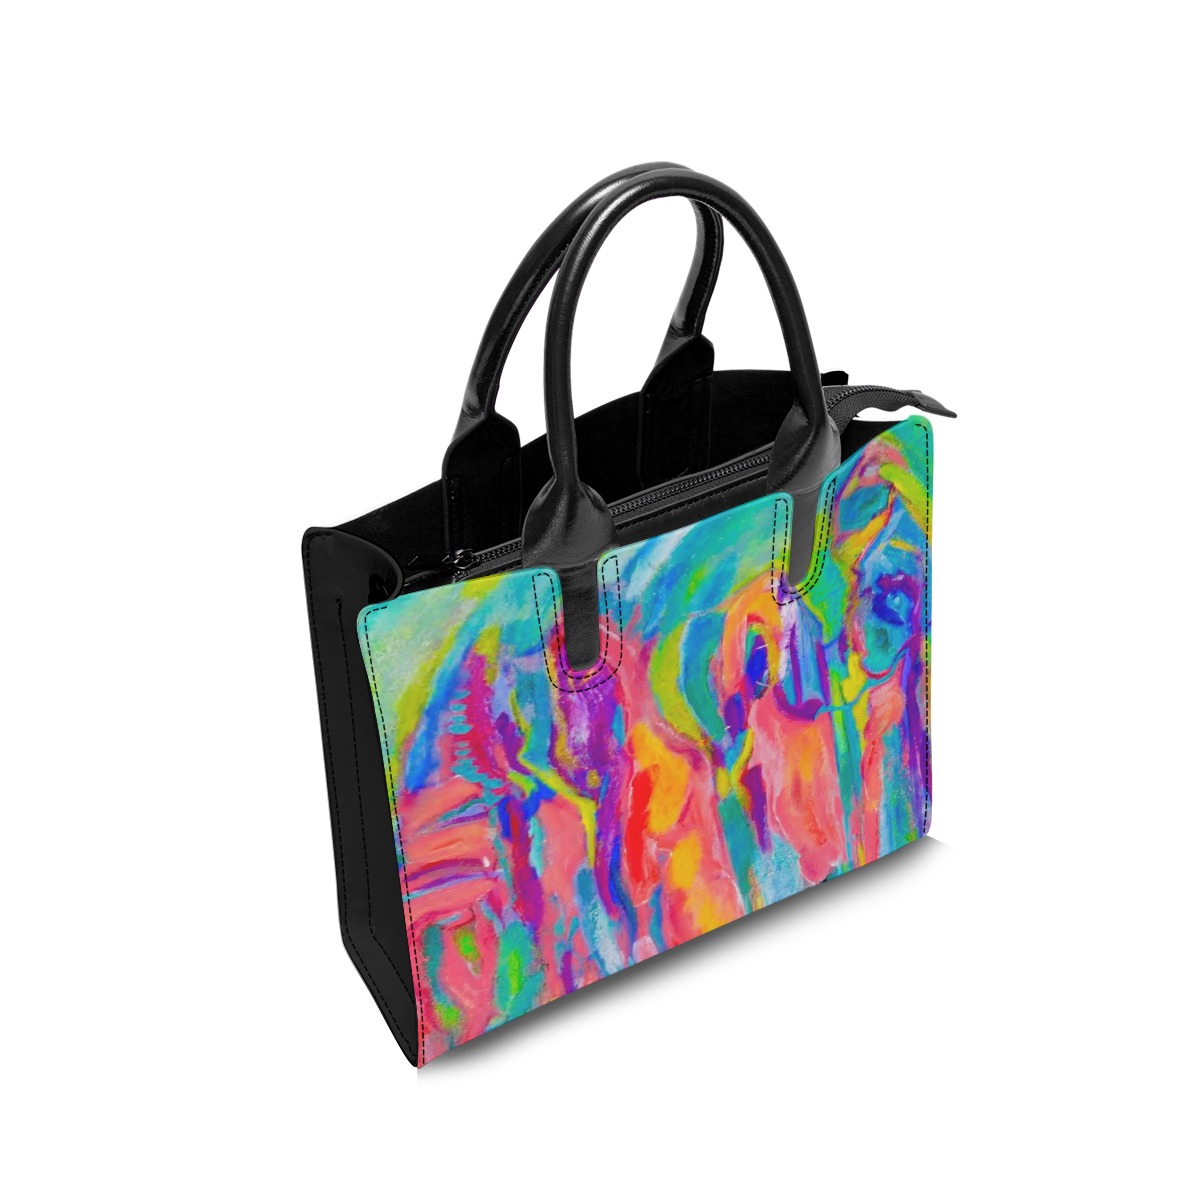 Fashion Square Tote Bag 4 Kings Collection